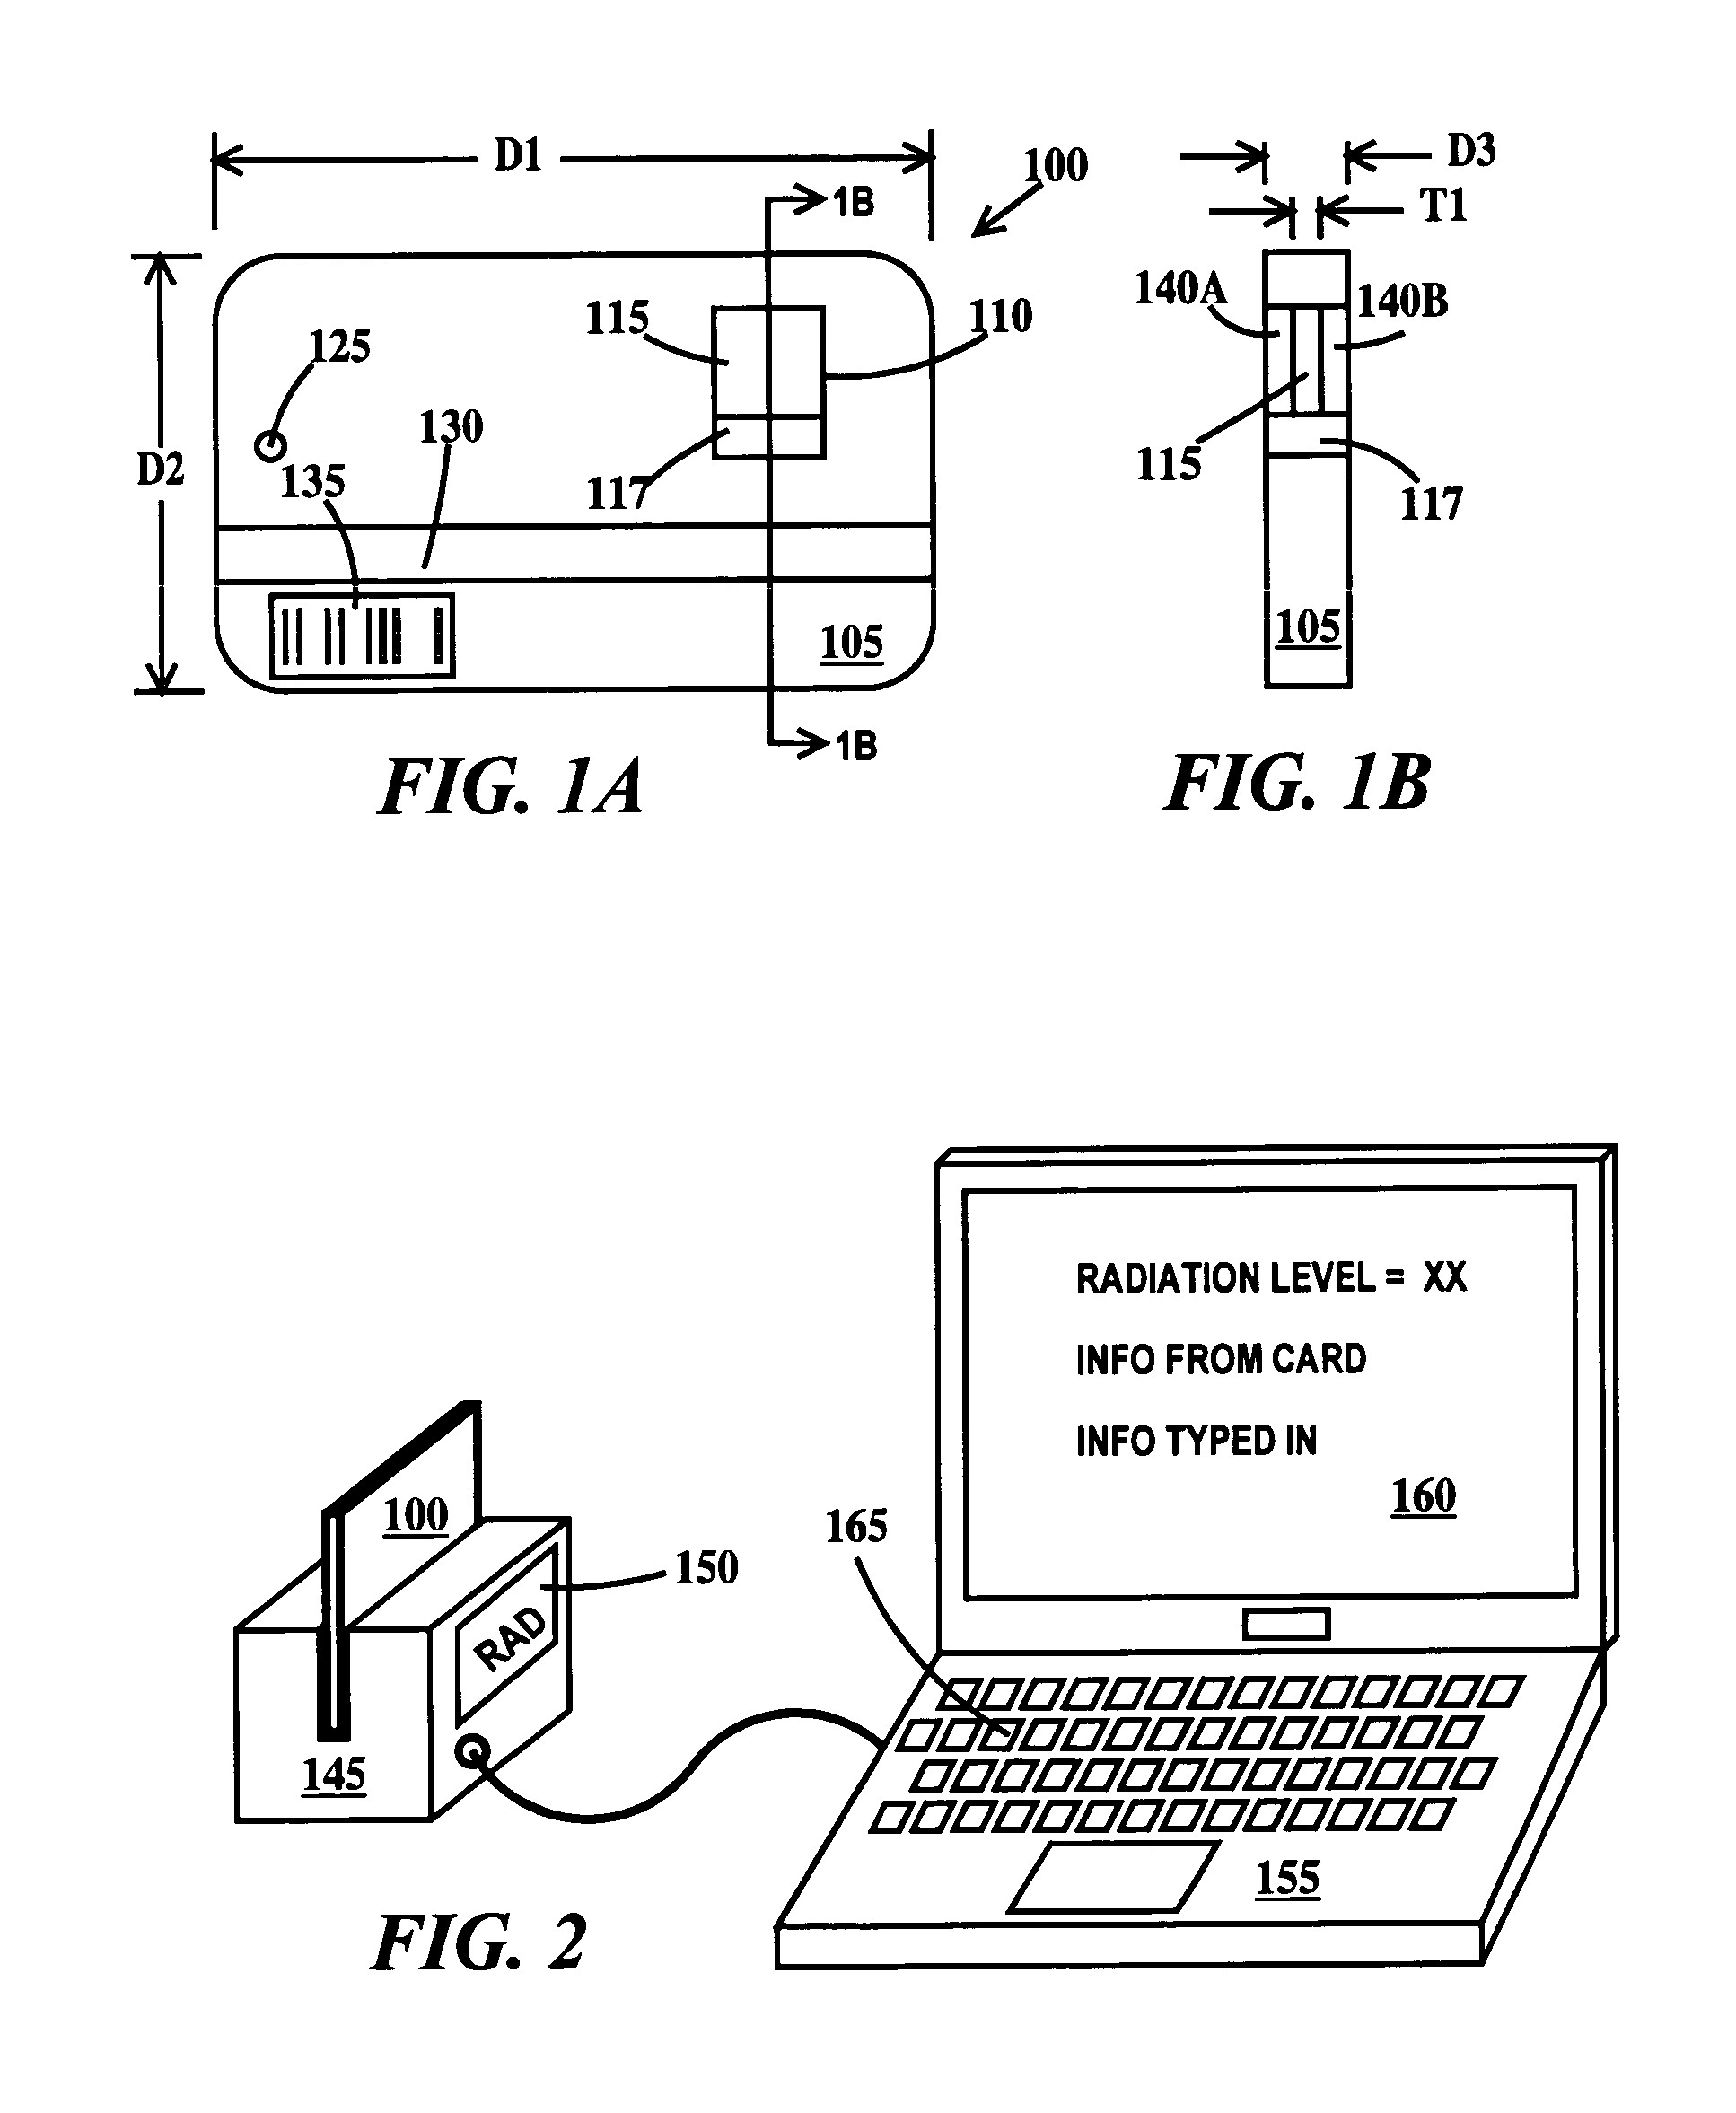 Method of detecting and transmitting radiation detection information to a network